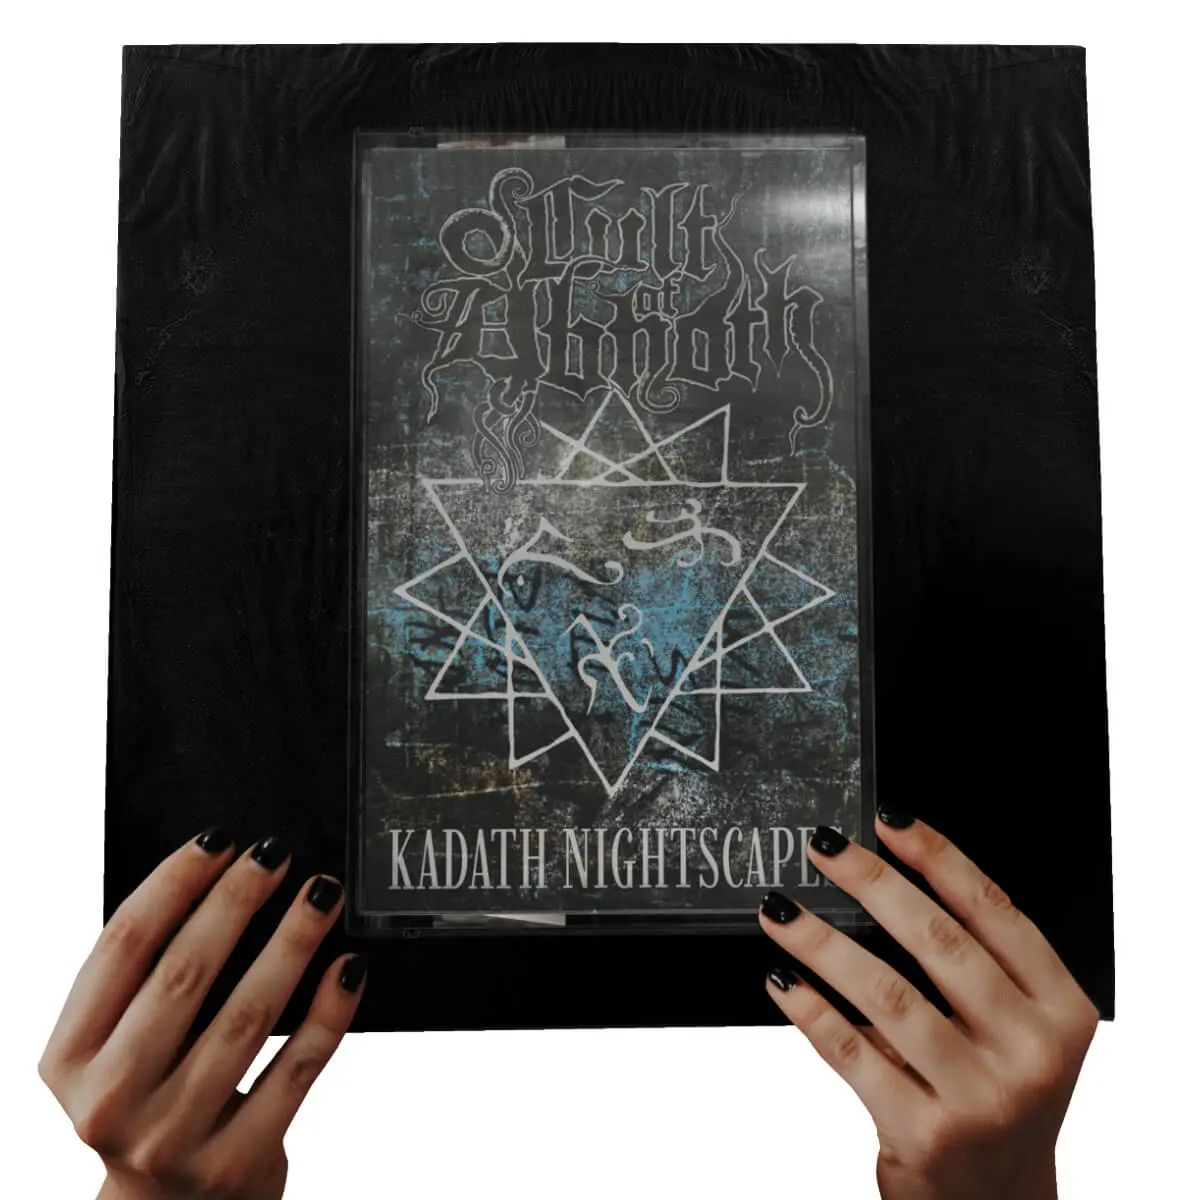 Cult Of Abhoth - Kadath Nightscapes Download